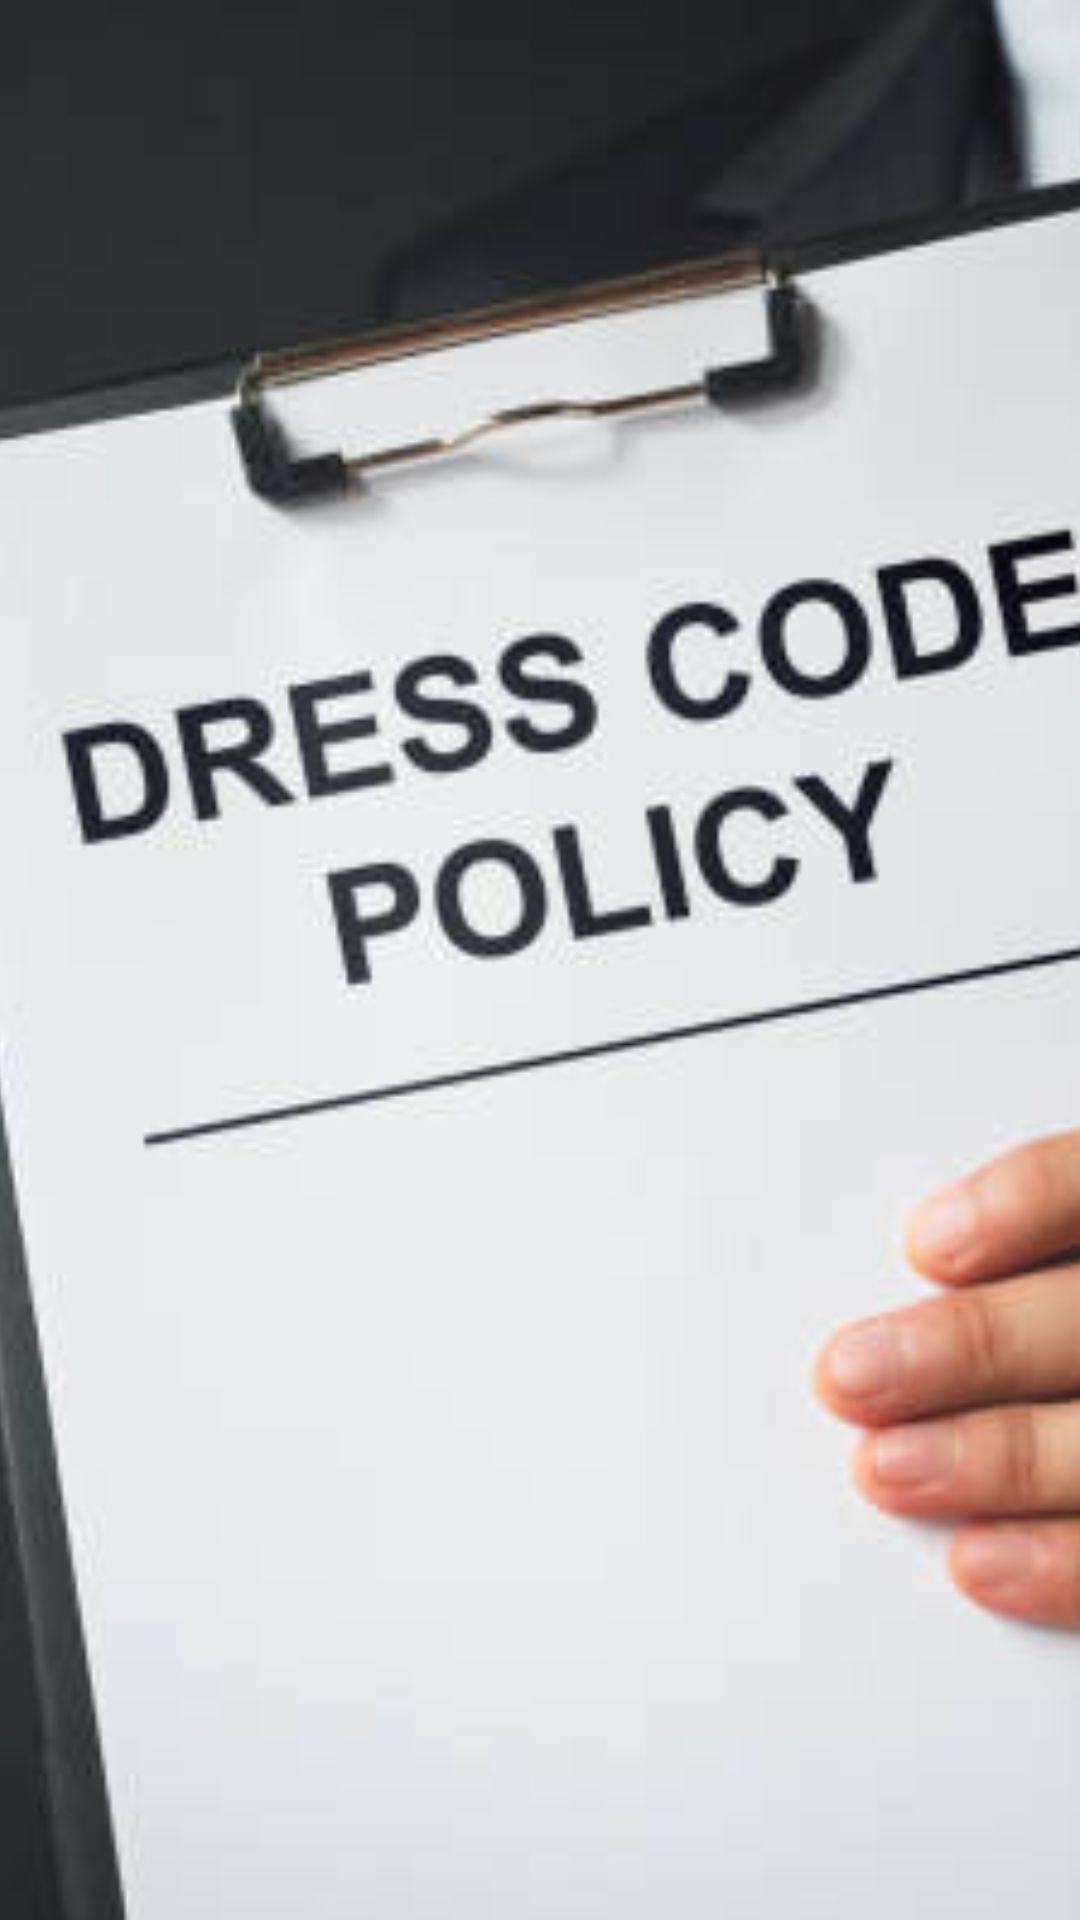 Is it allowed to wear jeans in IIT college? What are the rules regarding dress code?